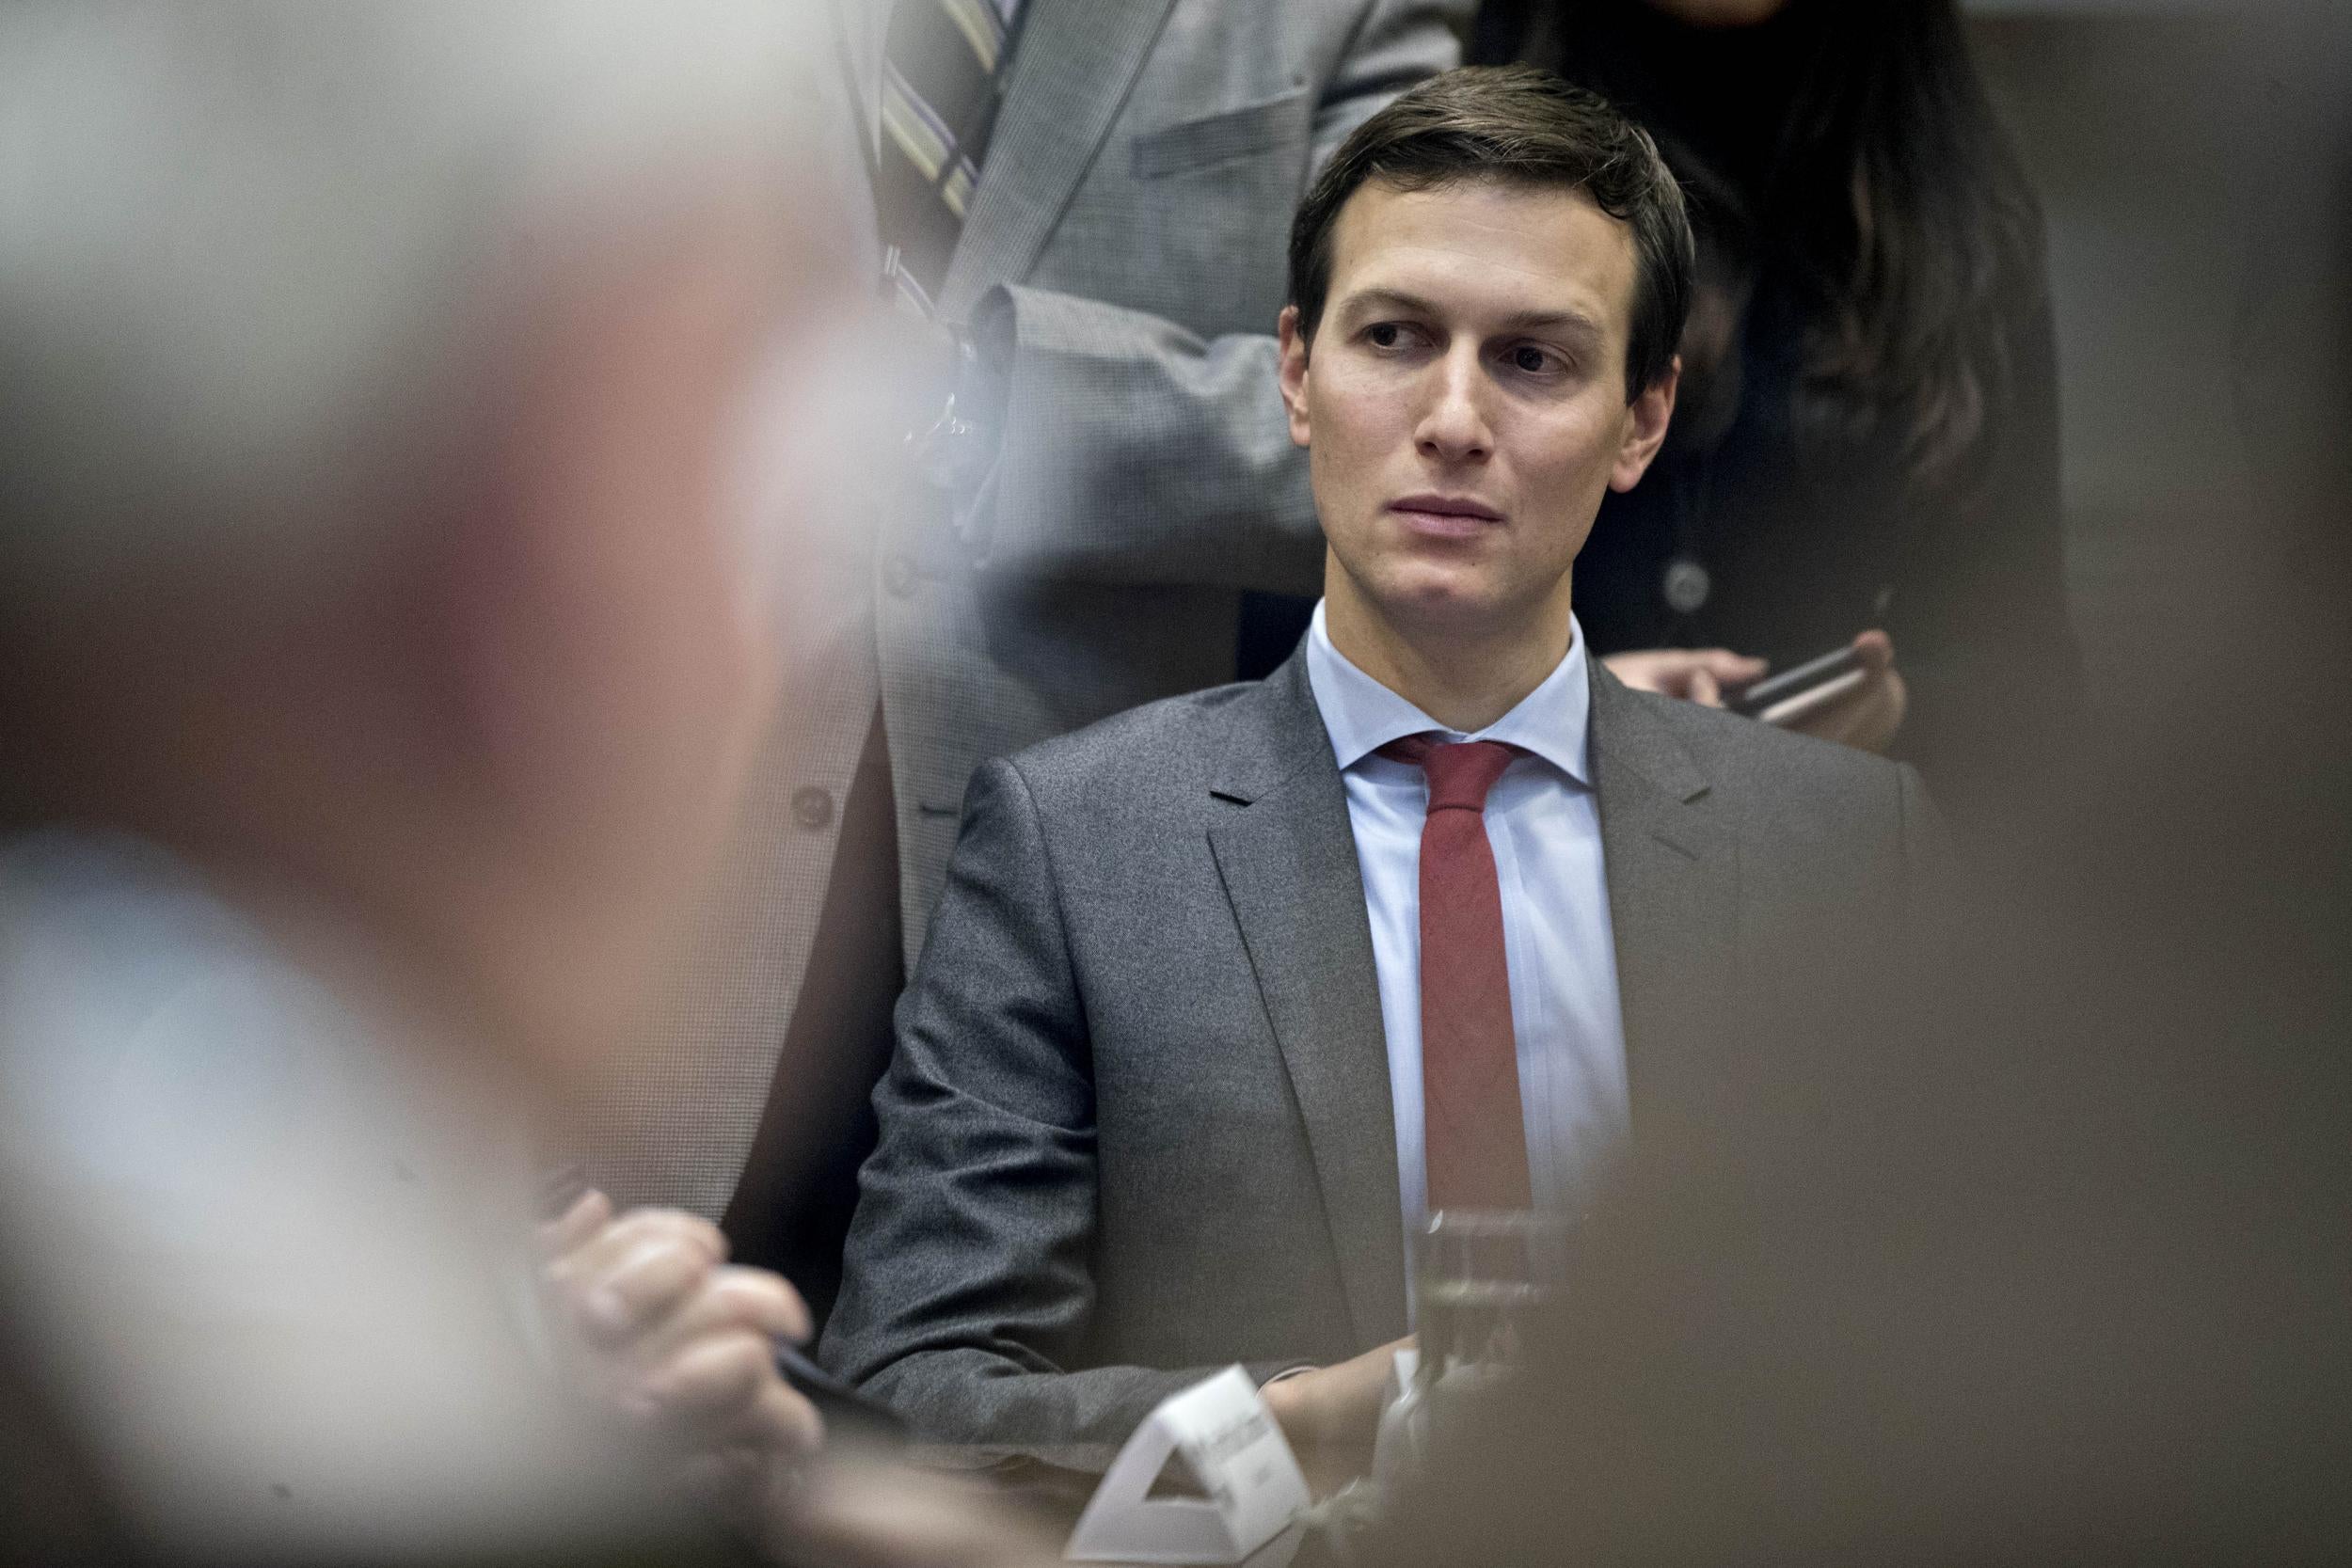 Jared Kushner is Mr Trump's son-in-law and trusted adviser